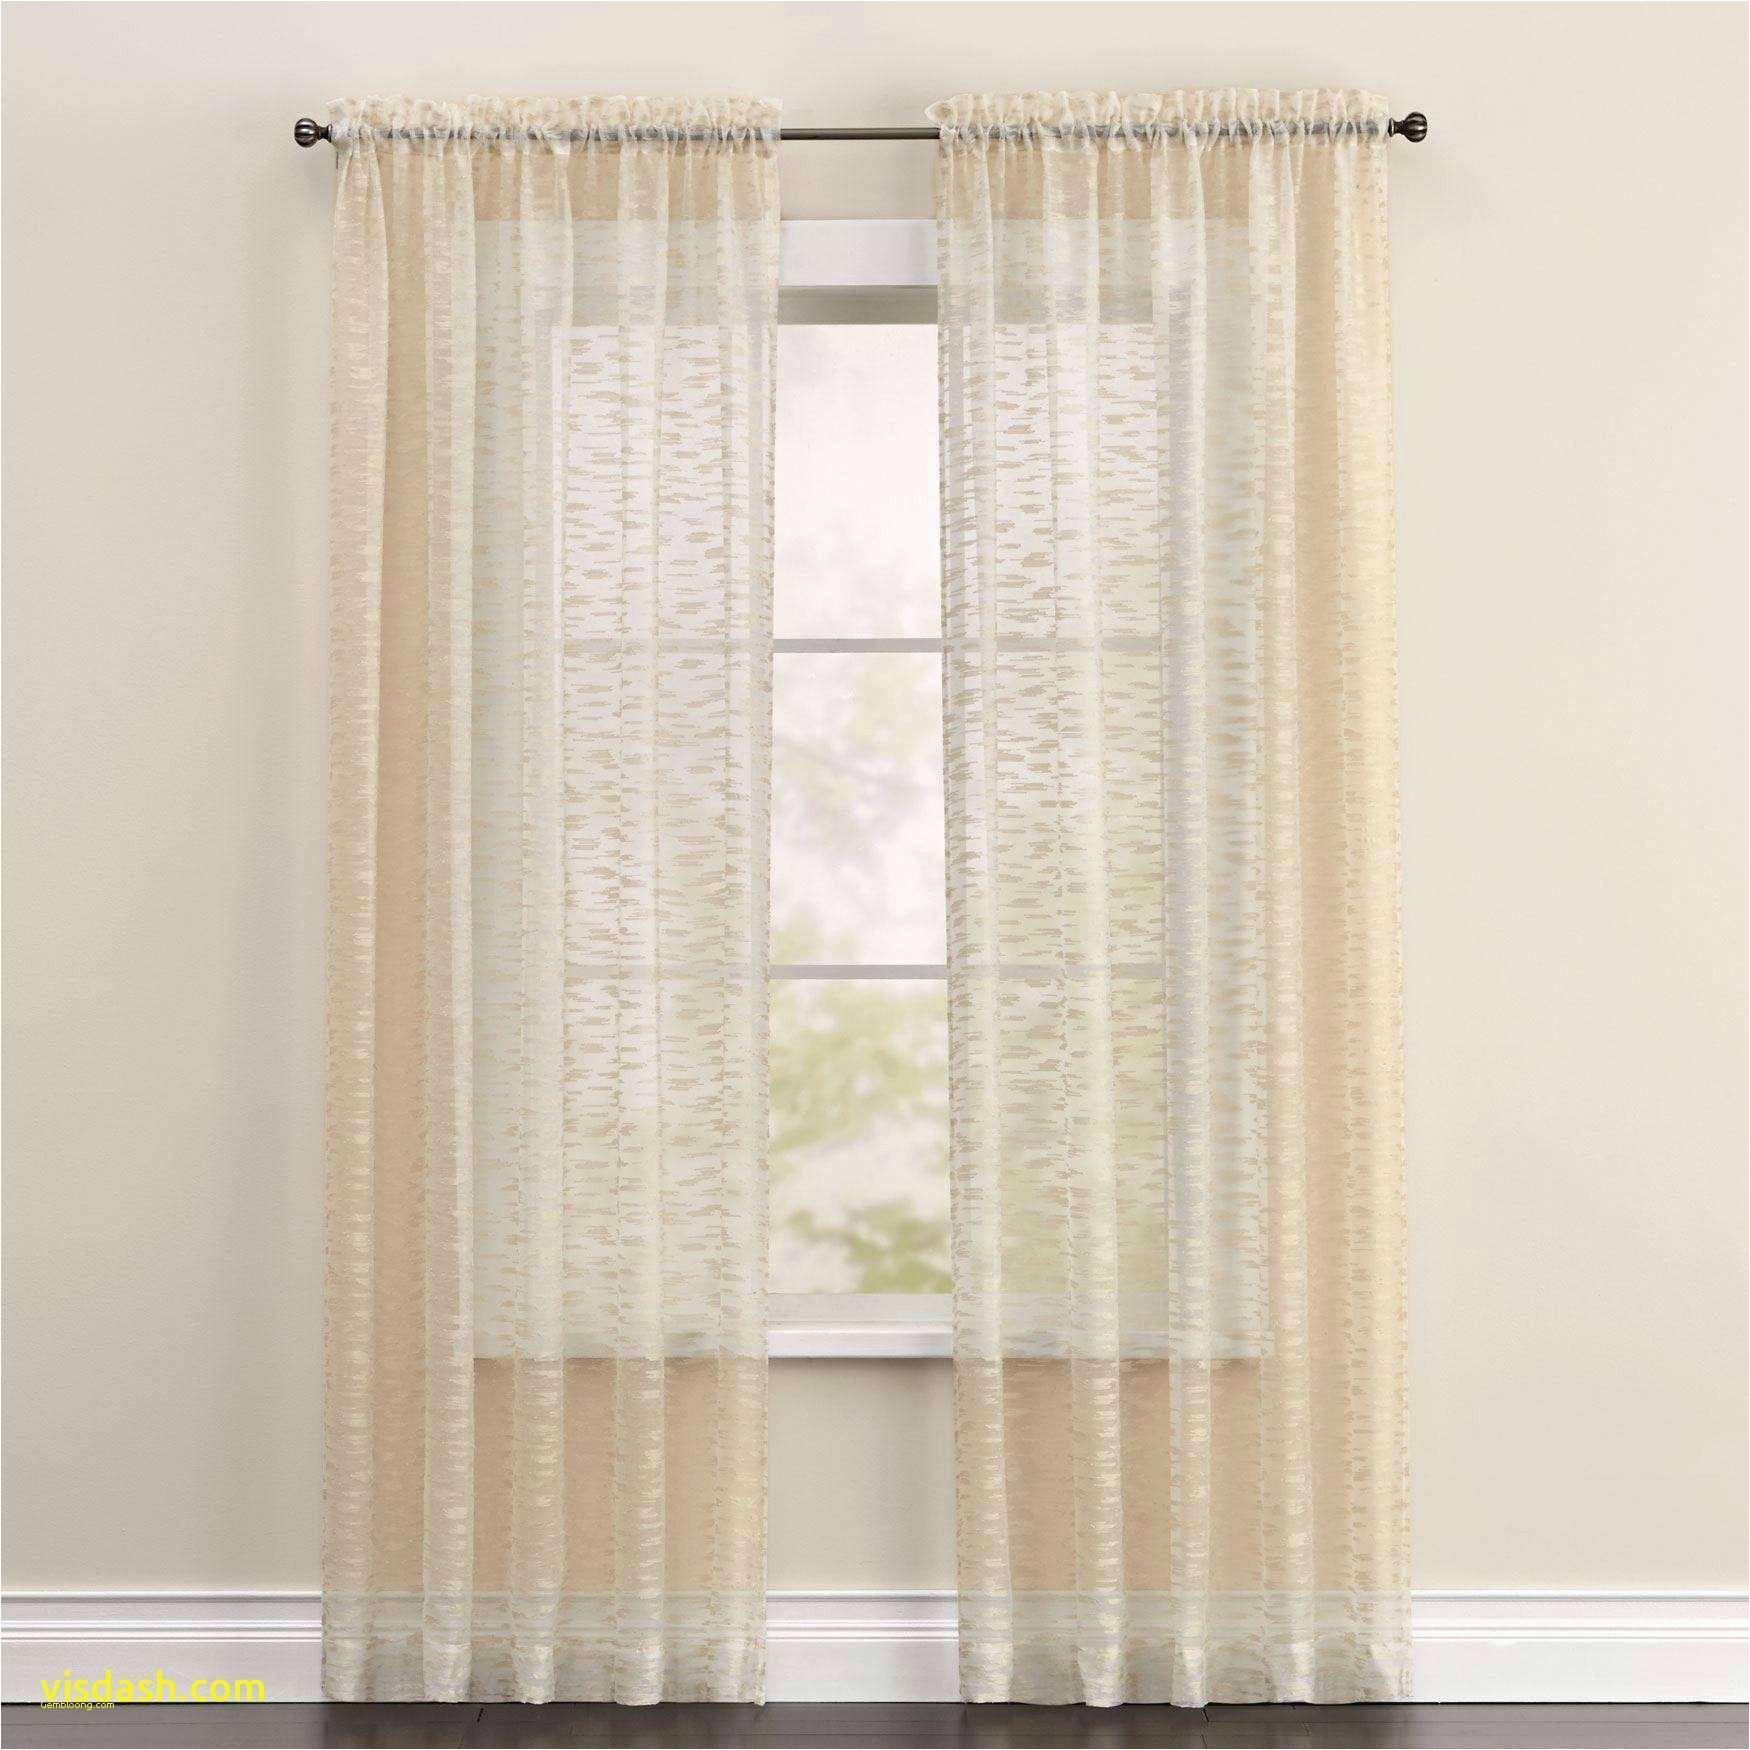 Walmart thermal Curtains Beautiful Furniture Sheer Curtains Lovely Walmart Drapes 0d Tags Marvelous 55 Ideas Living Room